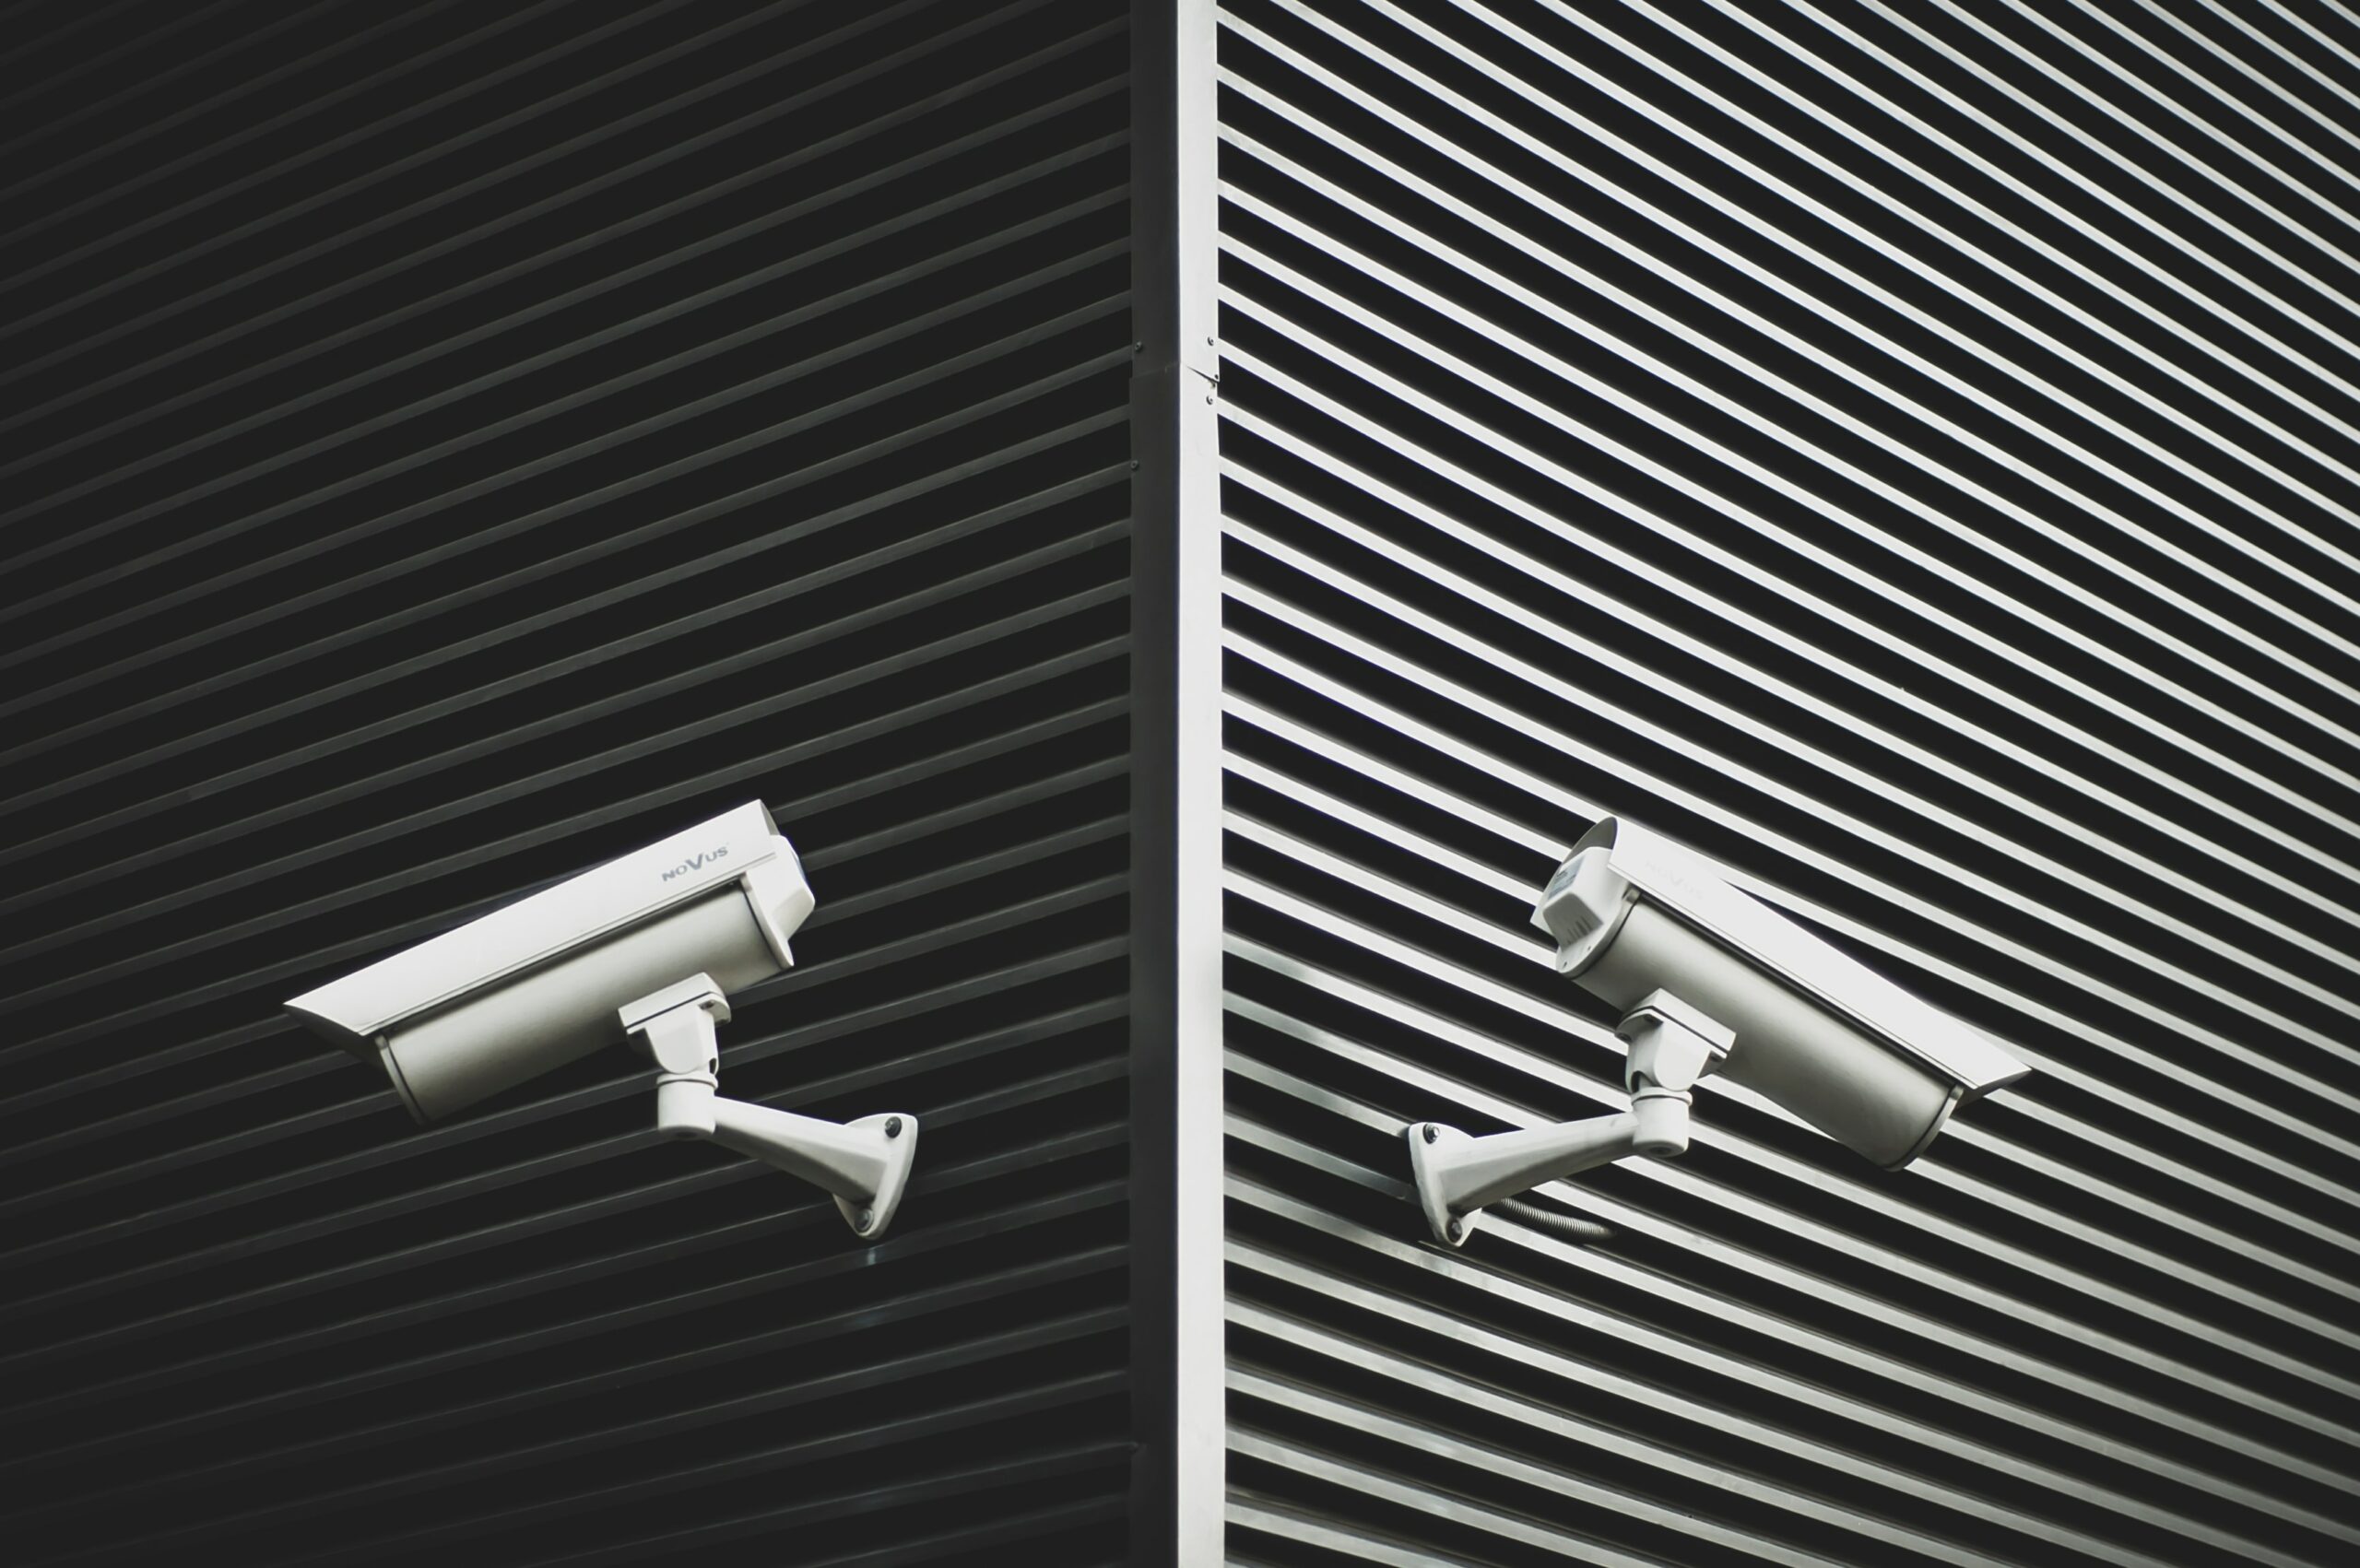 Two security cameras pointing in opposite directions against a black and white background